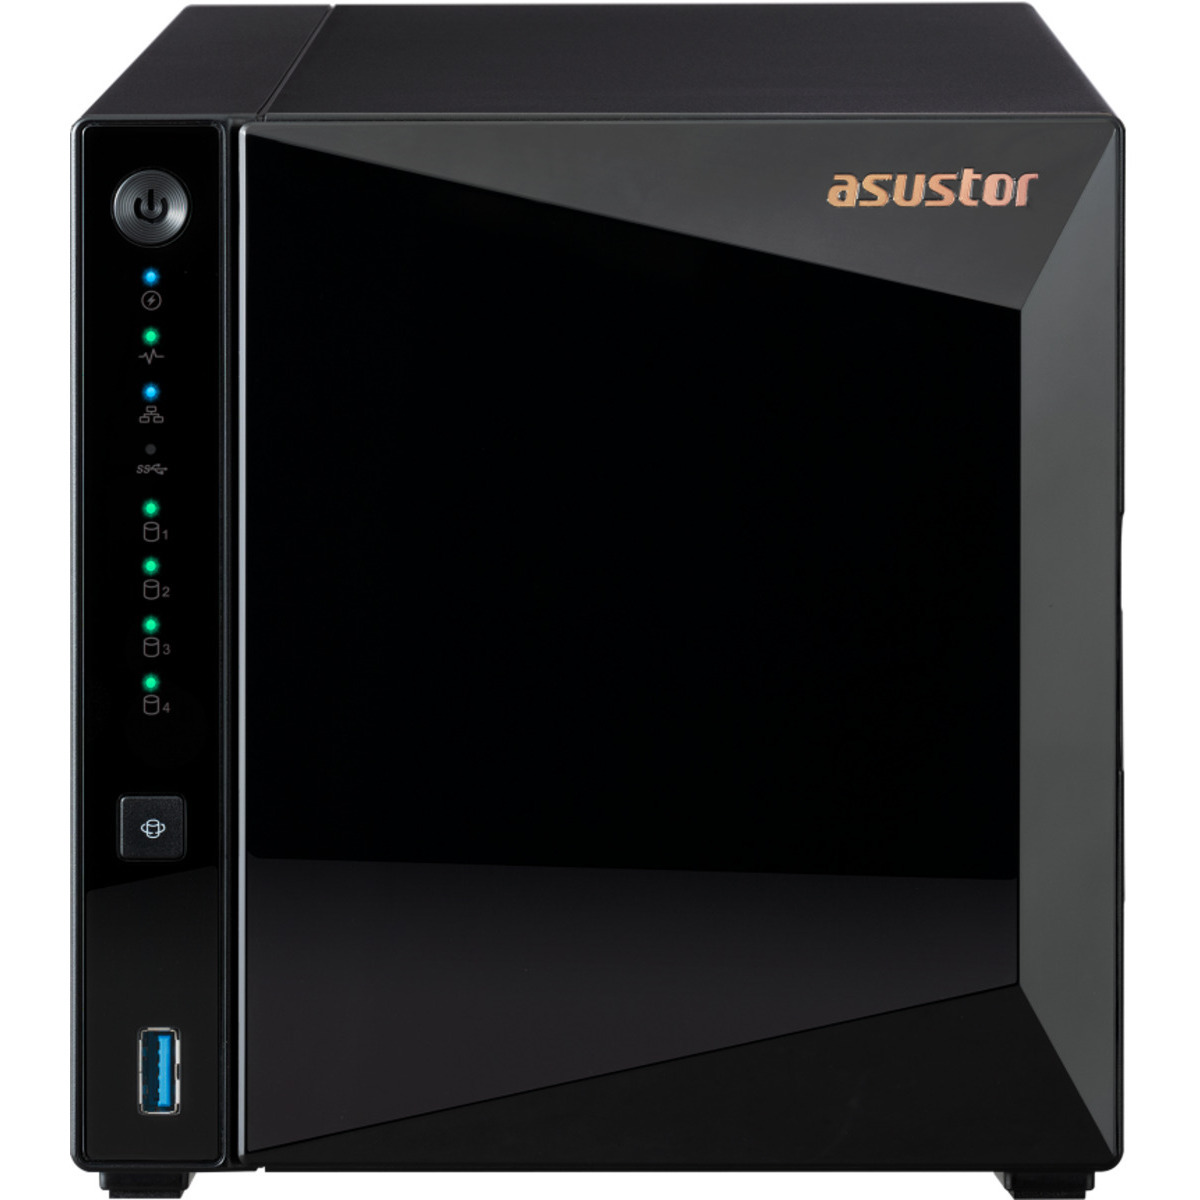 ASUSTOR DRIVESTOR 4 Pro AS3304T 40tb 4-Bay Desktop Personal / Basic Home / Small Office NAS - Network Attached Storage Device 4x10tb Seagate EXOS X18 ST10000NM018G 3.5 7200rpm SATA 6Gb/s HDD ENTERPRISE Class Drives Installed - Burn-In Tested DRIVESTOR 4 Pro AS3304T